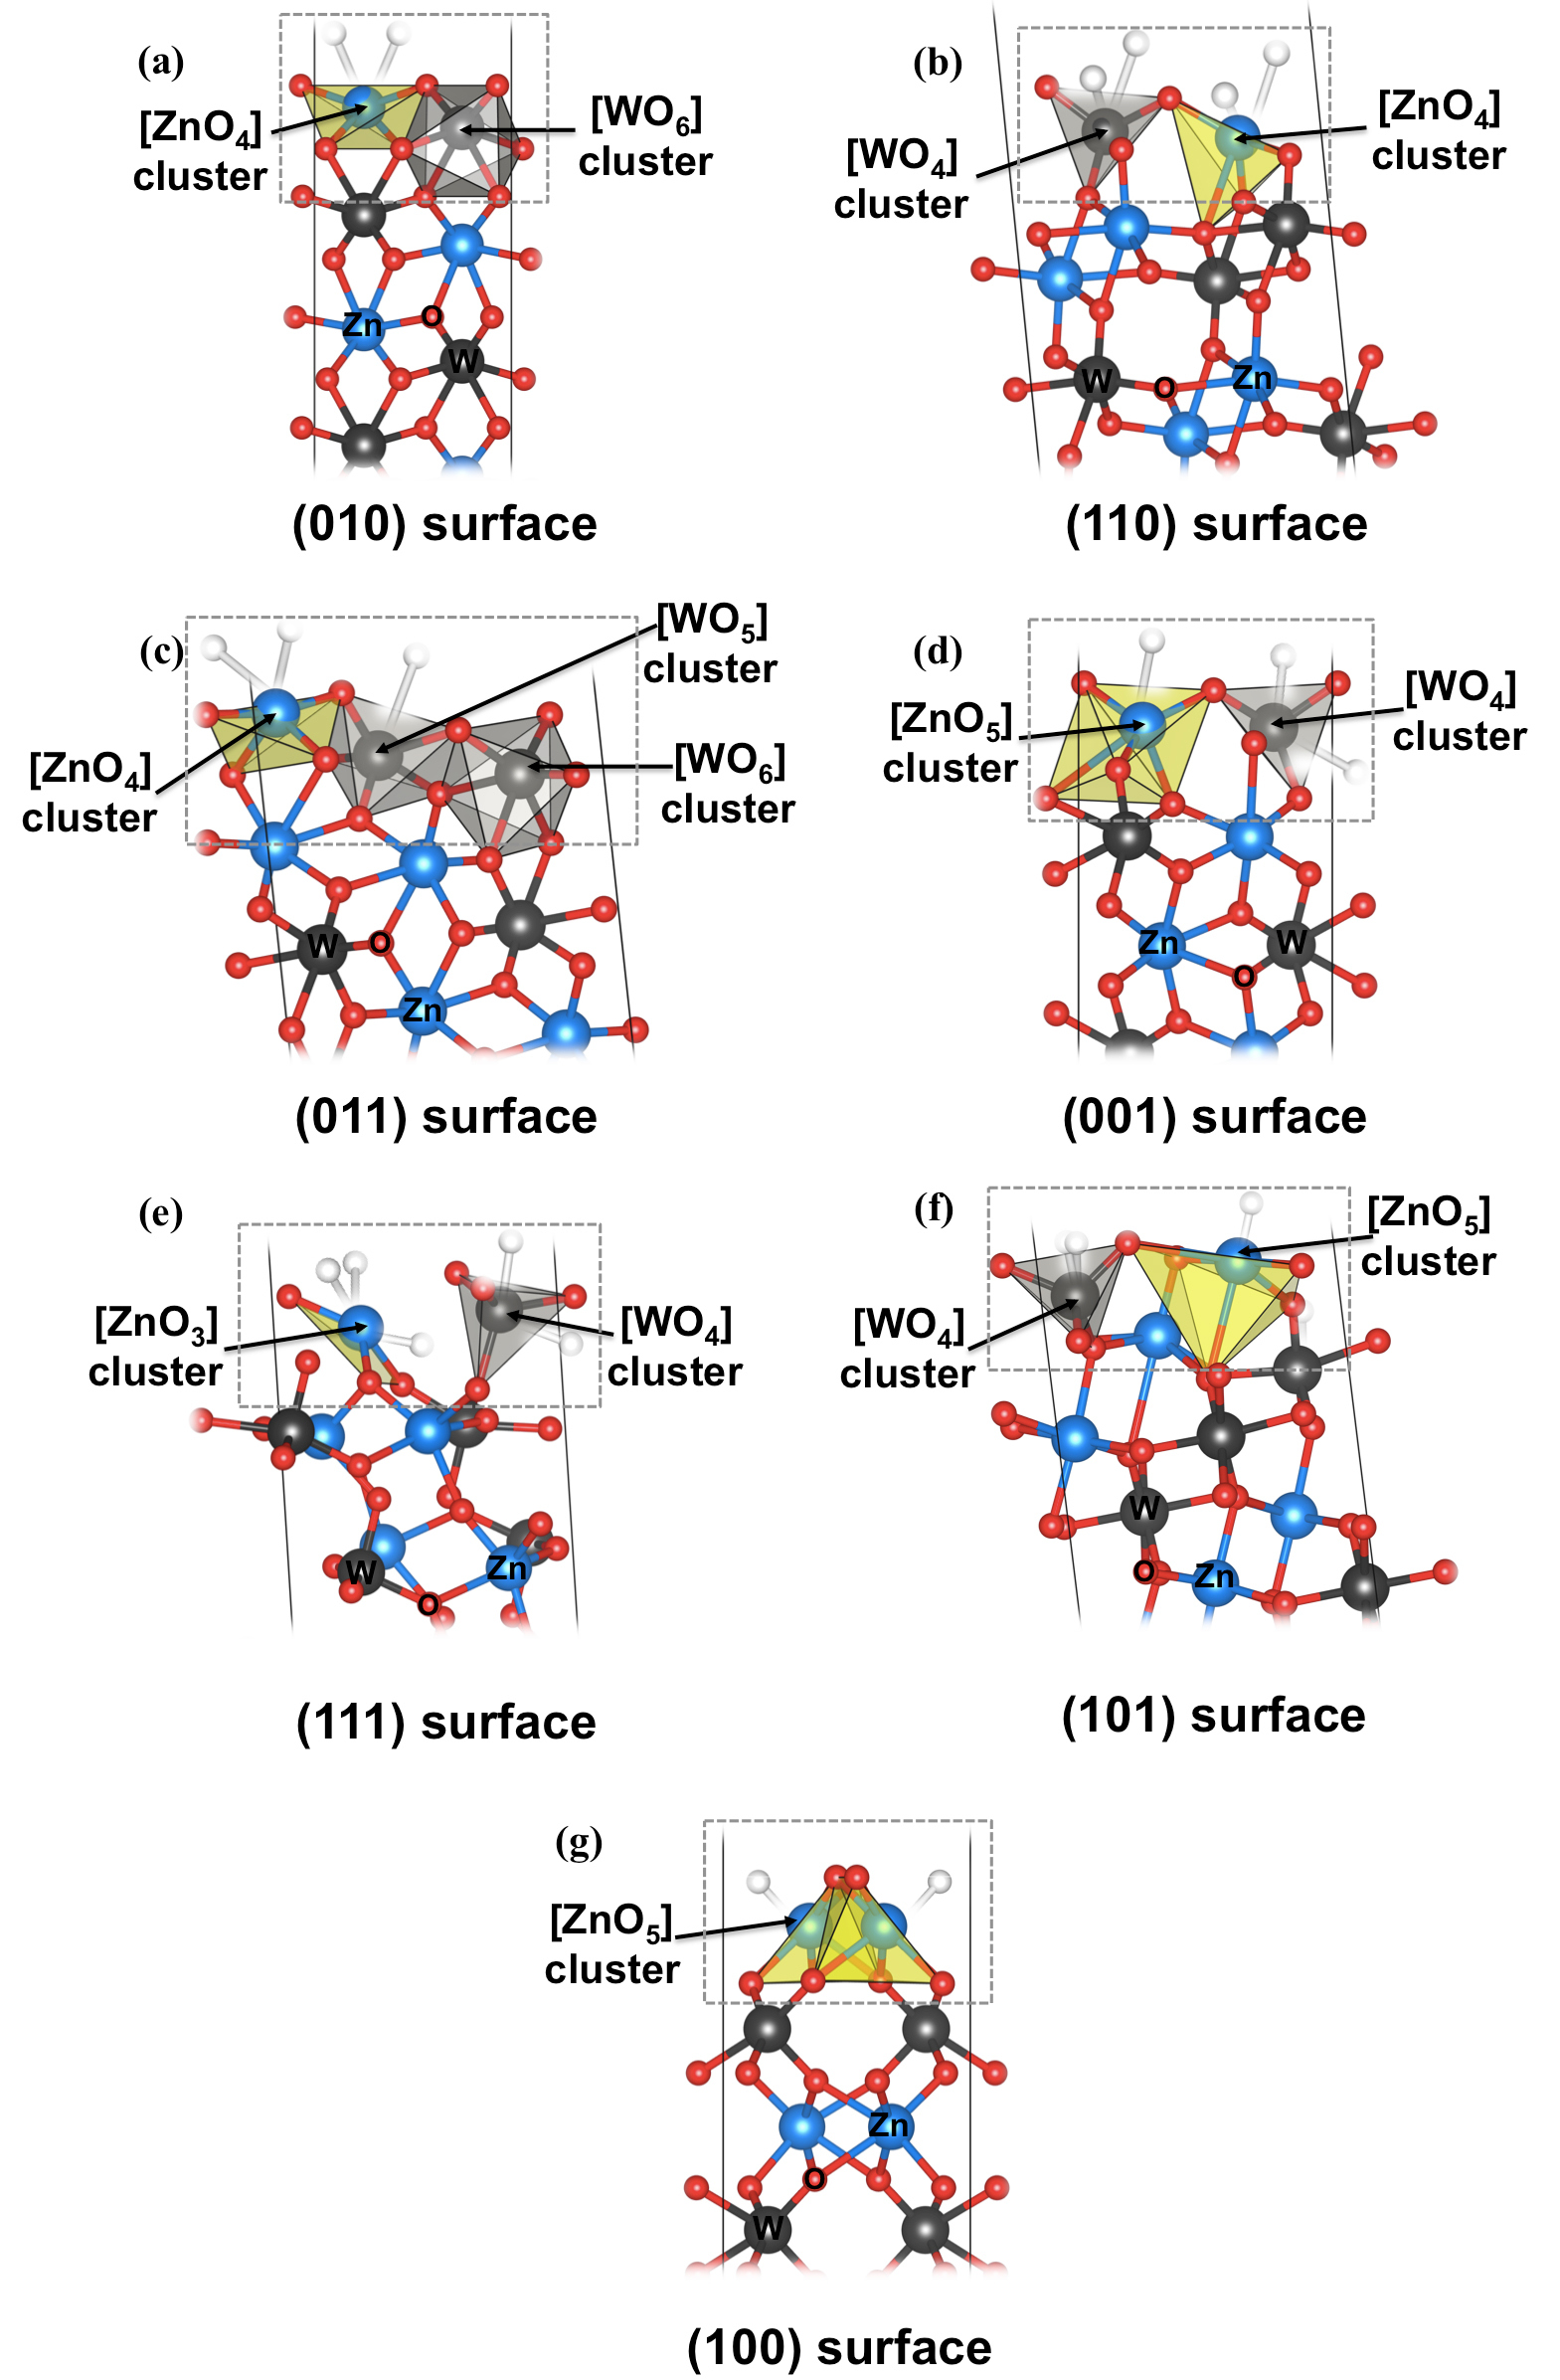 Surface models for monoclinic ZnWO4 structure: (a) (010), (b) (110), (c) (011), (d) (001), (e) (111), (f) (101), and (g) (100) surfaces. The clusters at the top of each surface are highlighted.